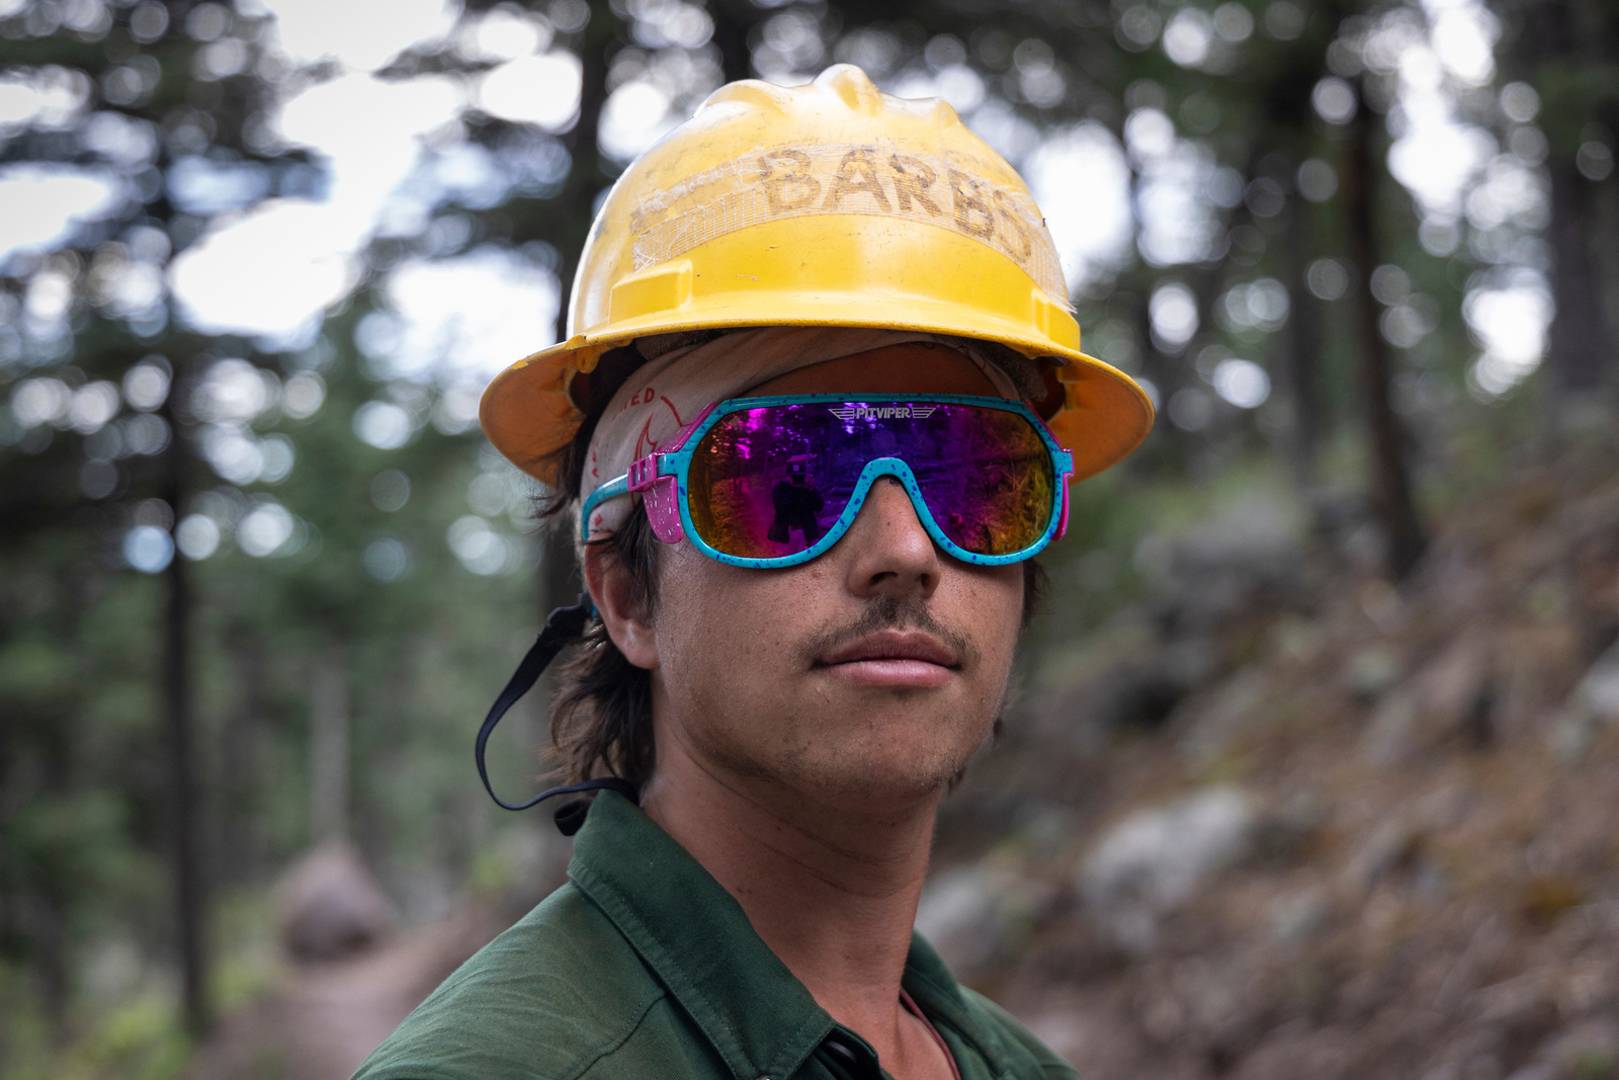 Camper Conservationist Zack Saderup poses for a portrait near Crater Lake staff camp at Philmont Scout Ranch in Cimarron, N.M., on July 19, 2022.